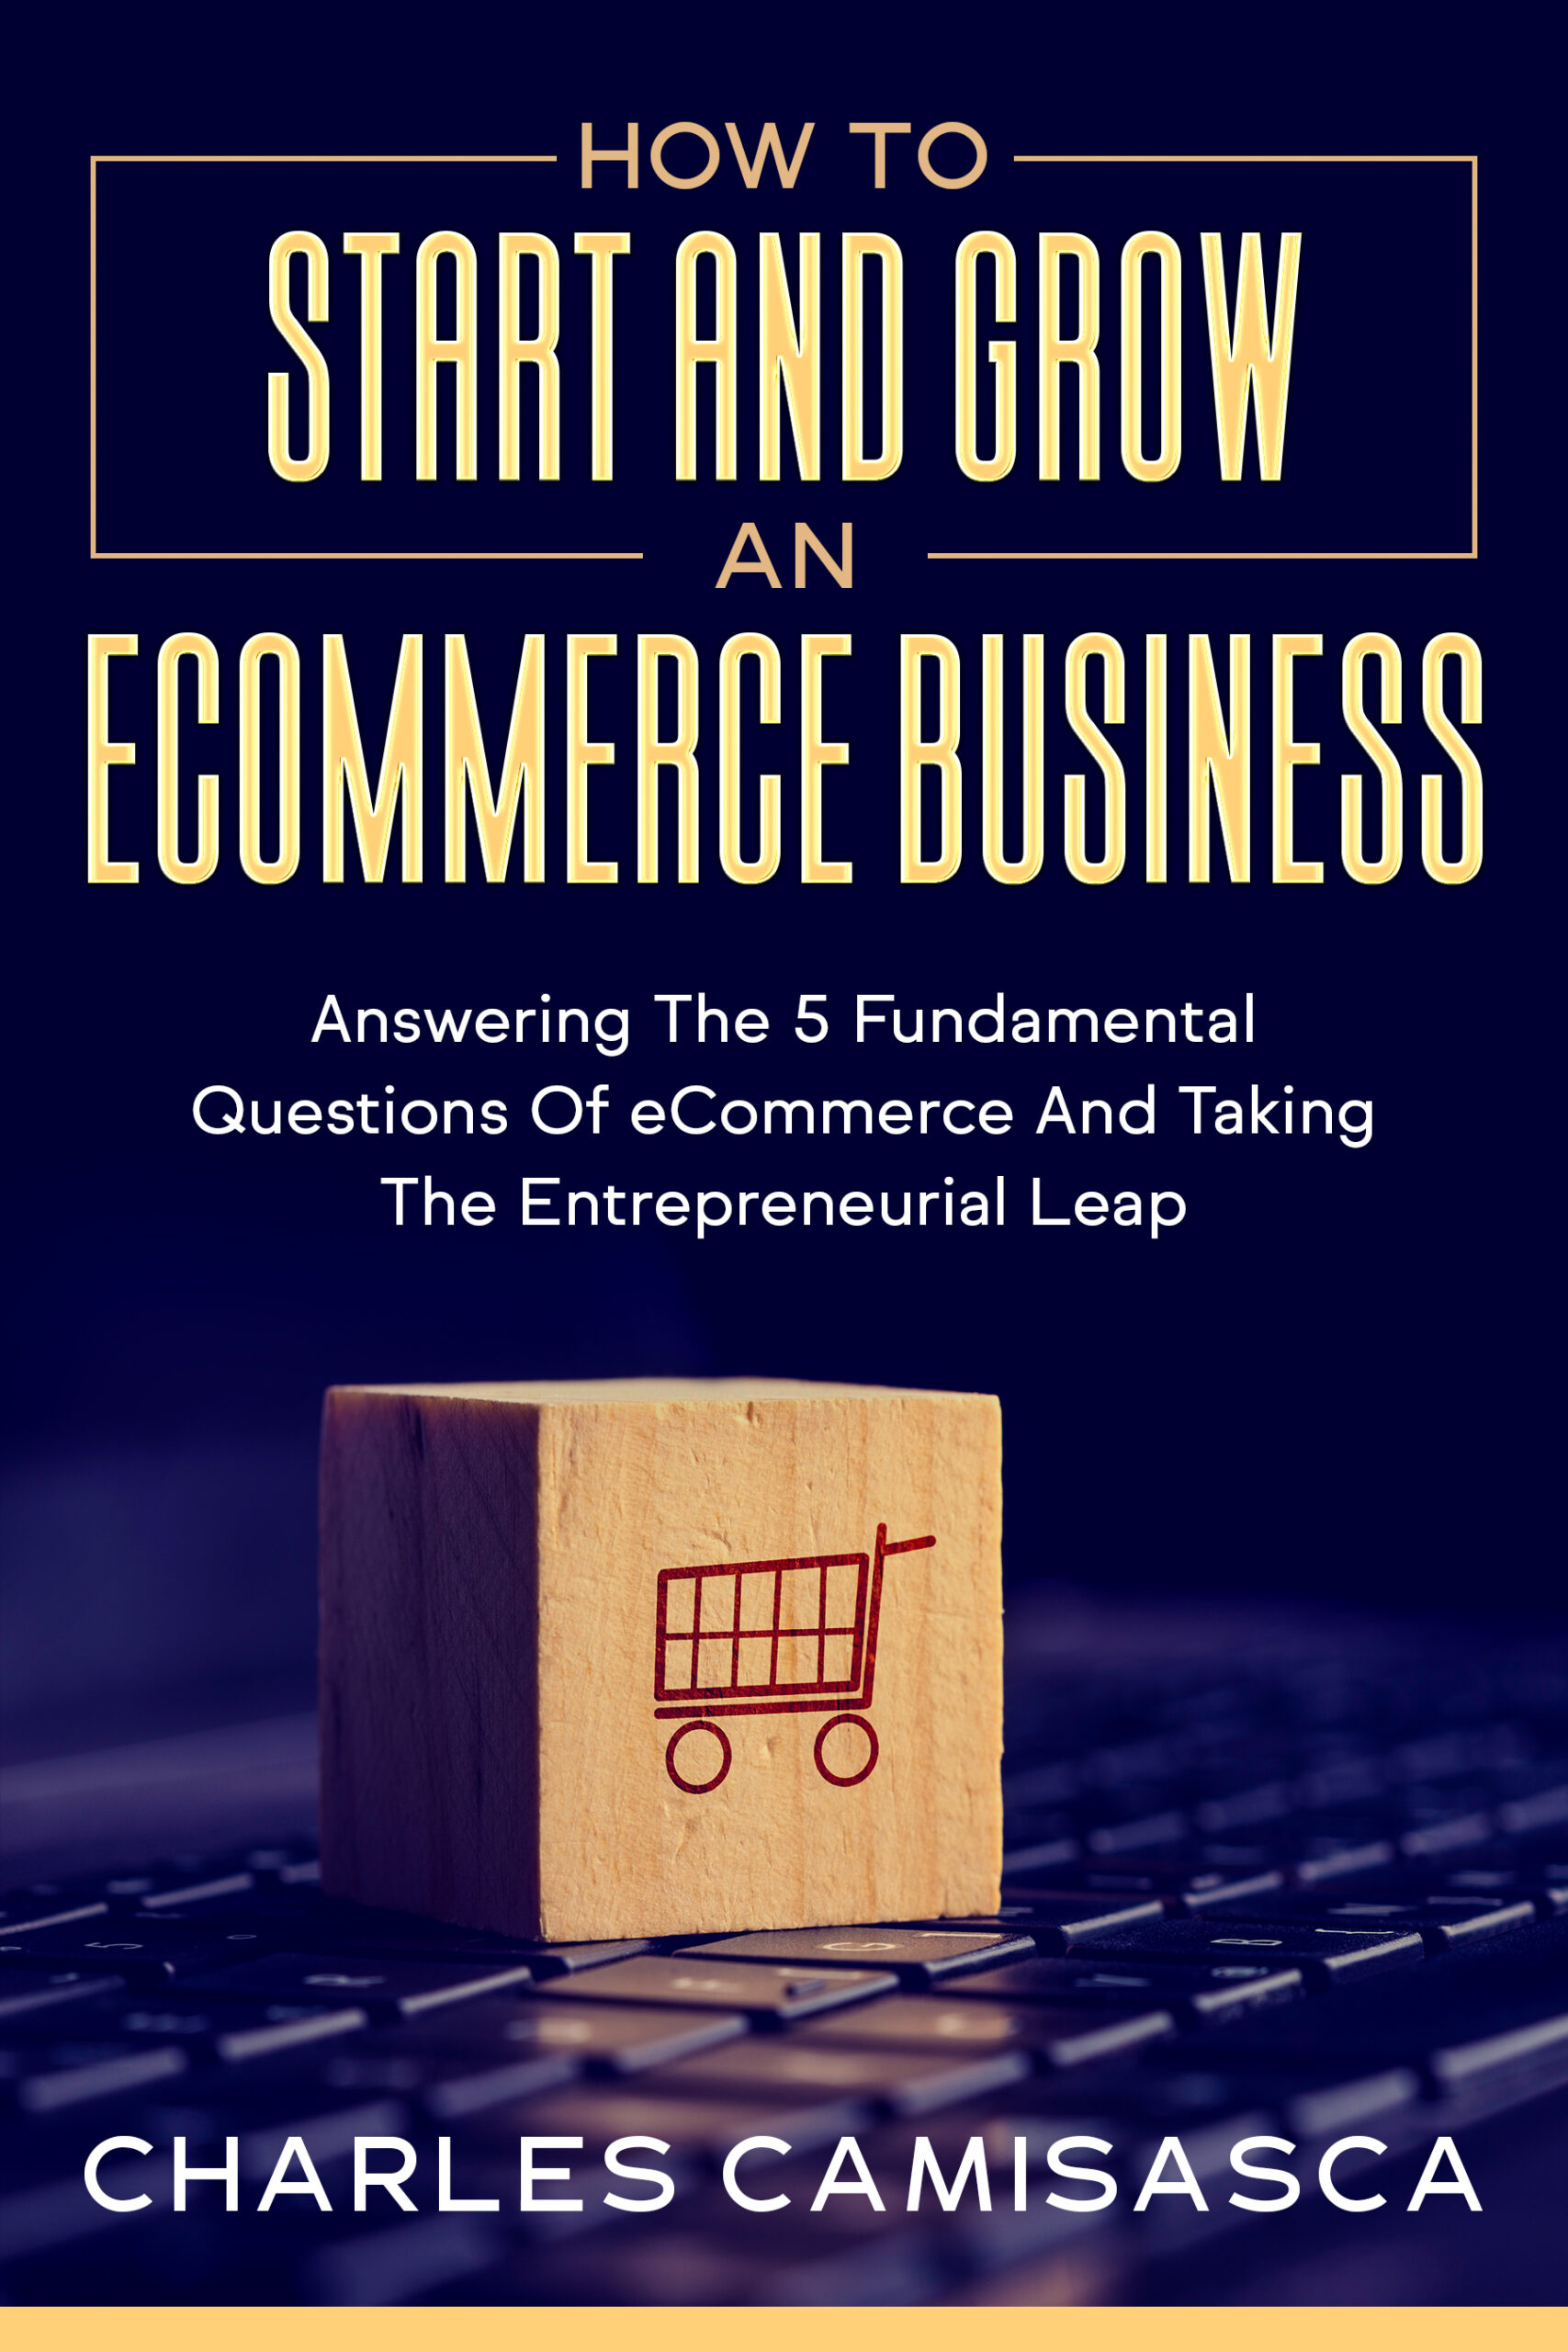 [22 Version] How to Start and Grow an E-Commerce Business by Charles Camisasca